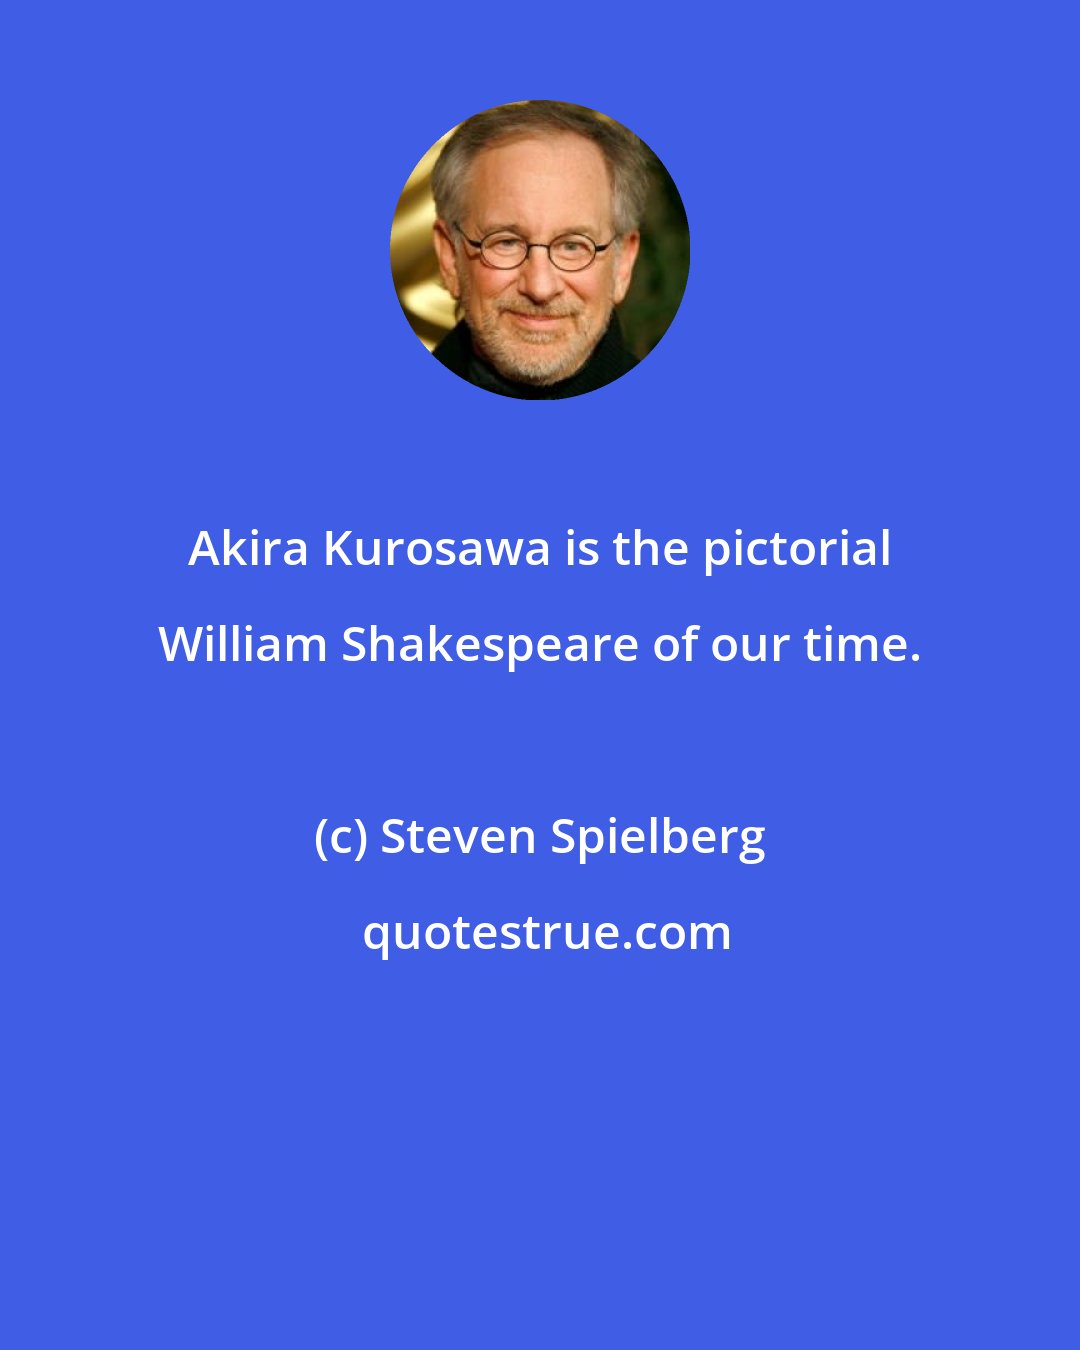 Steven Spielberg: Akira Kurosawa is the pictorial William Shakespeare of our time.